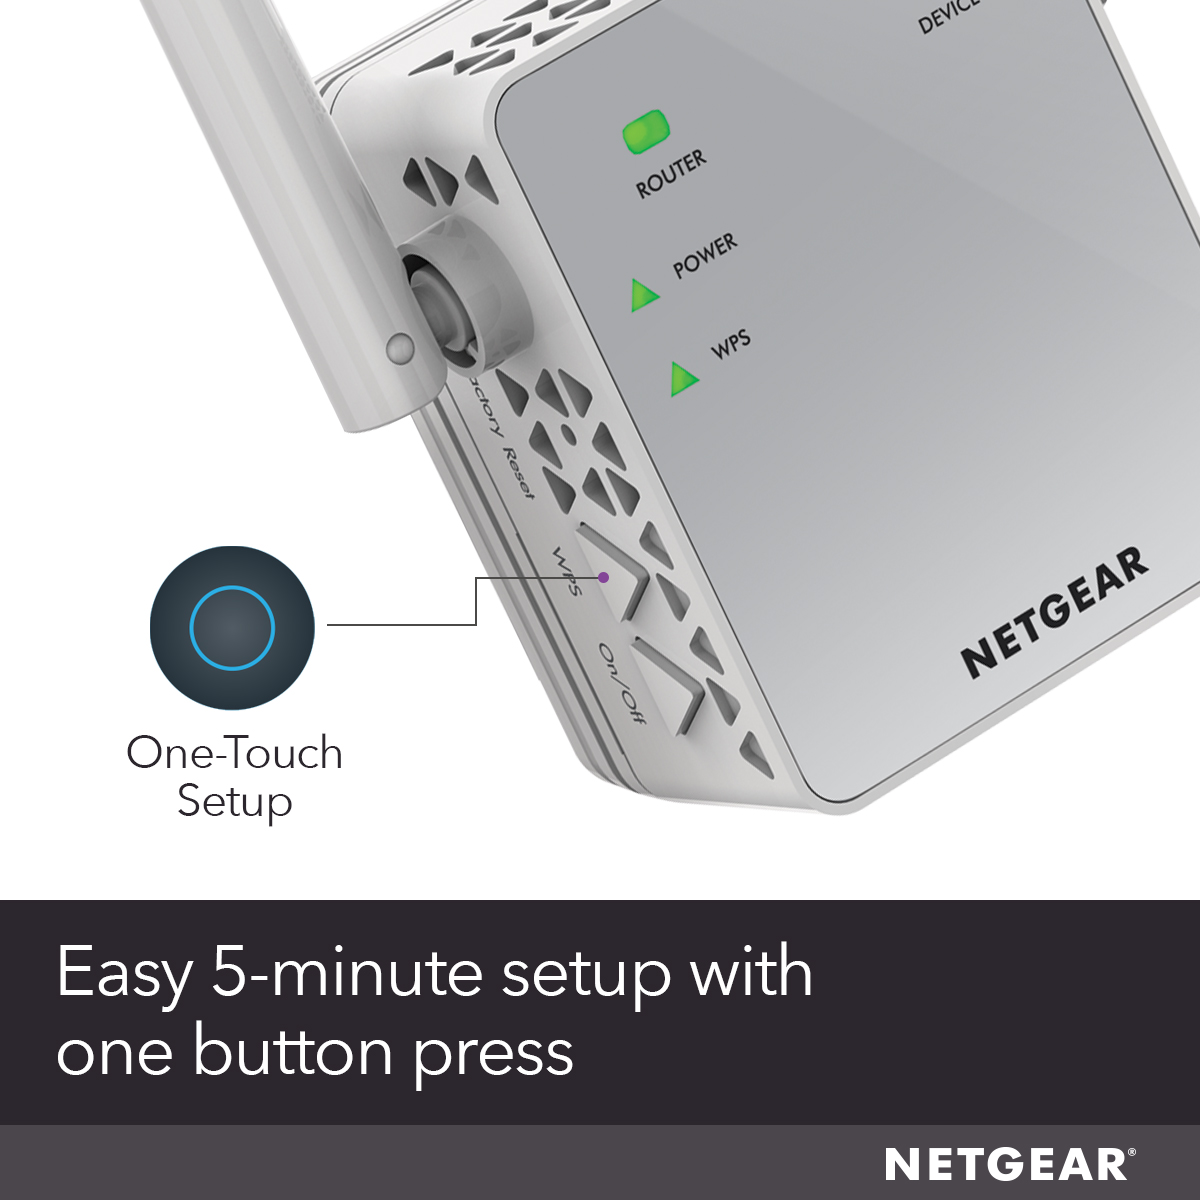 NETGEAR - AC750 WiFi Range Extender and Signal Booster, Wall-Plug, 750Mbps (EX3700) - image 6 of 7